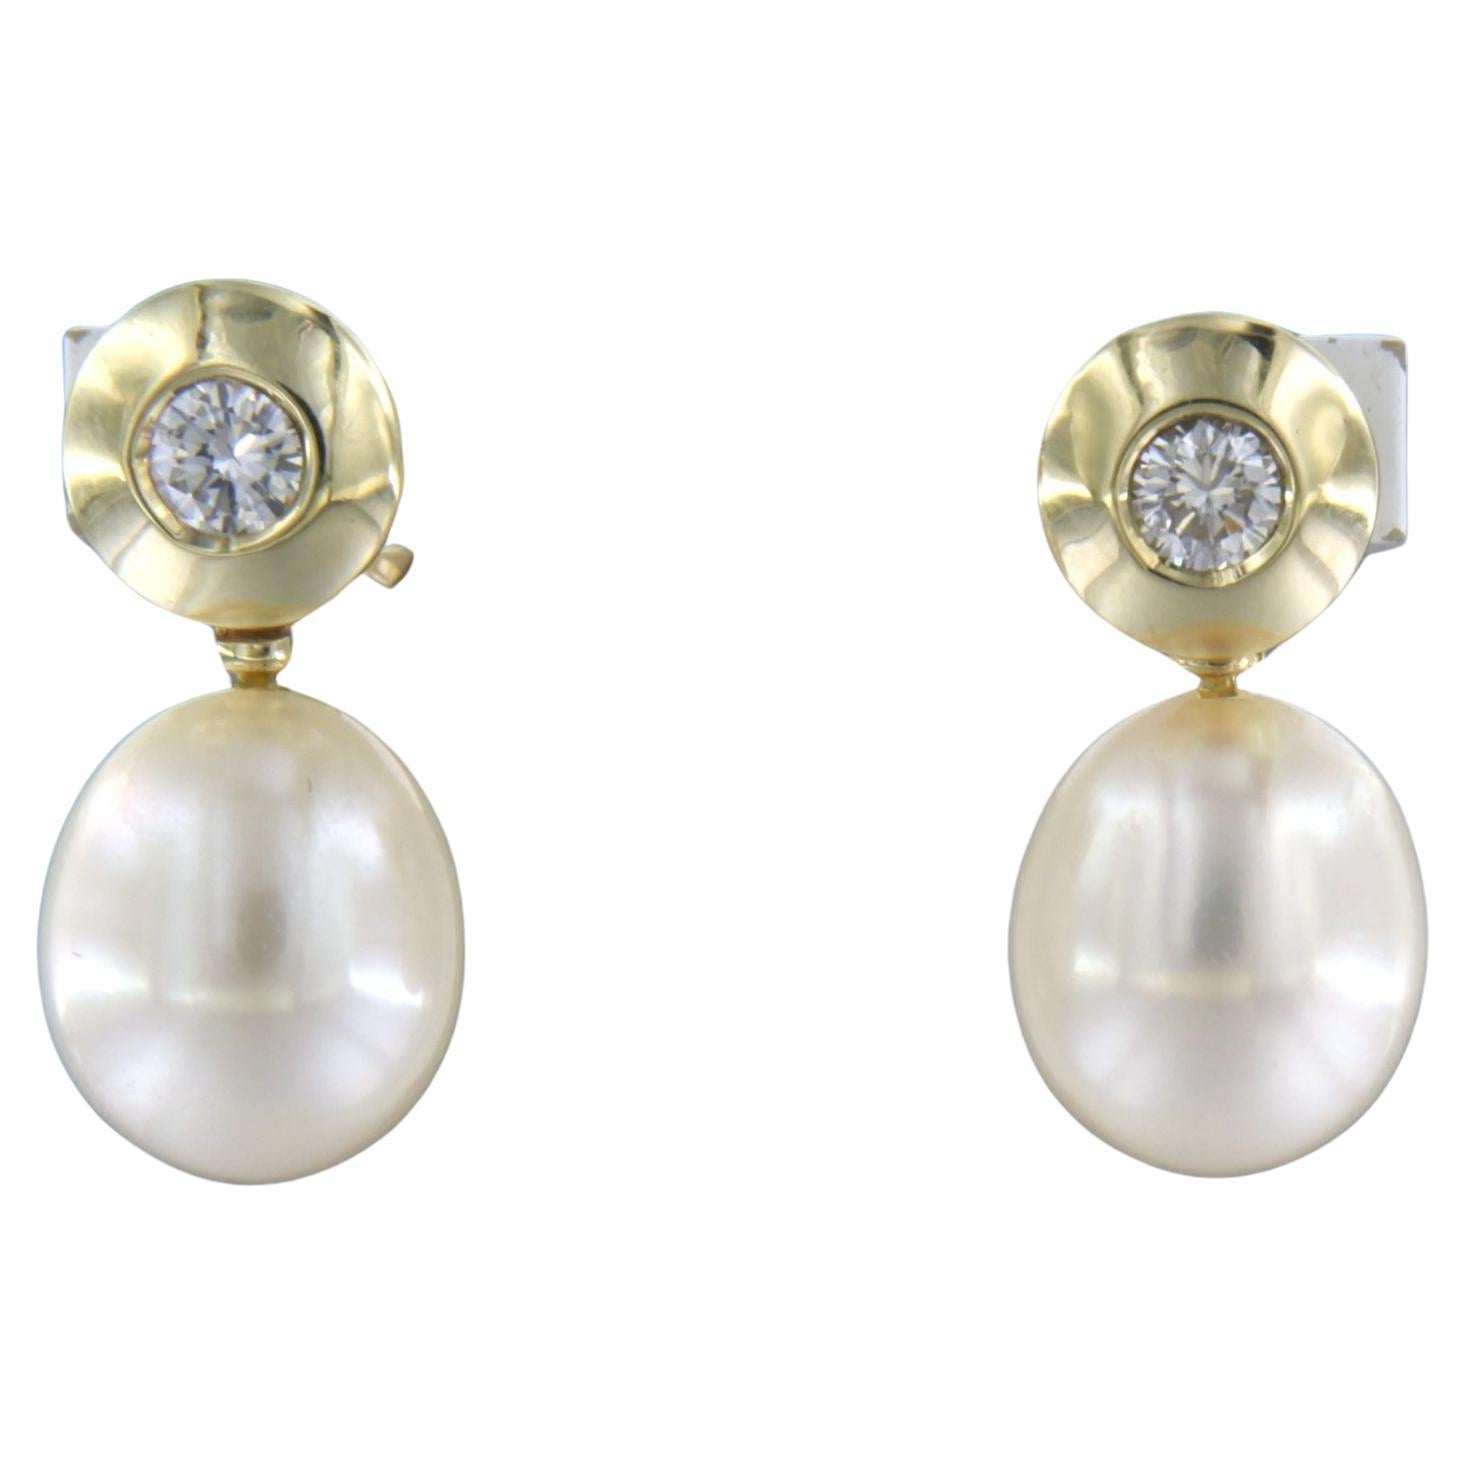 Earrings set with pearl and brilliant cut diamond up to 0.30ct. 14k yellow gold